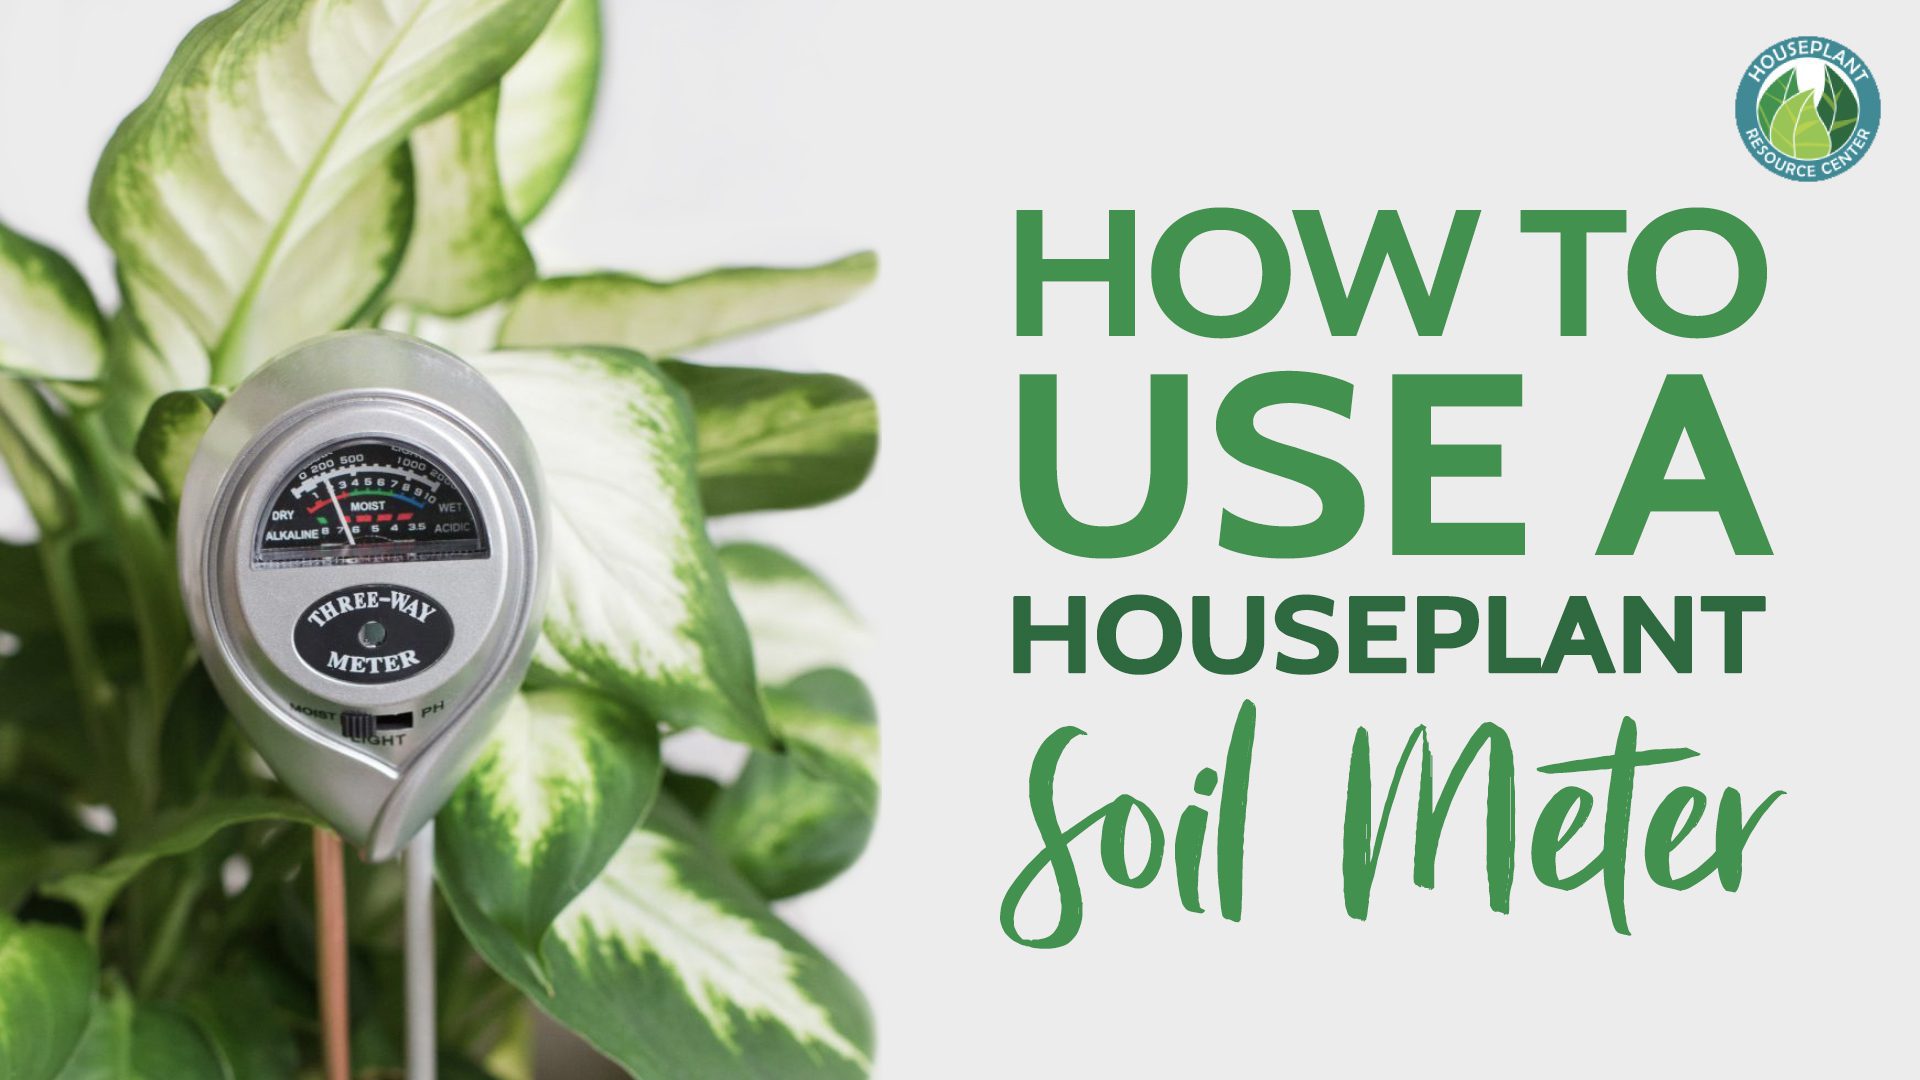 How to Use a Houseplant Soil Meter